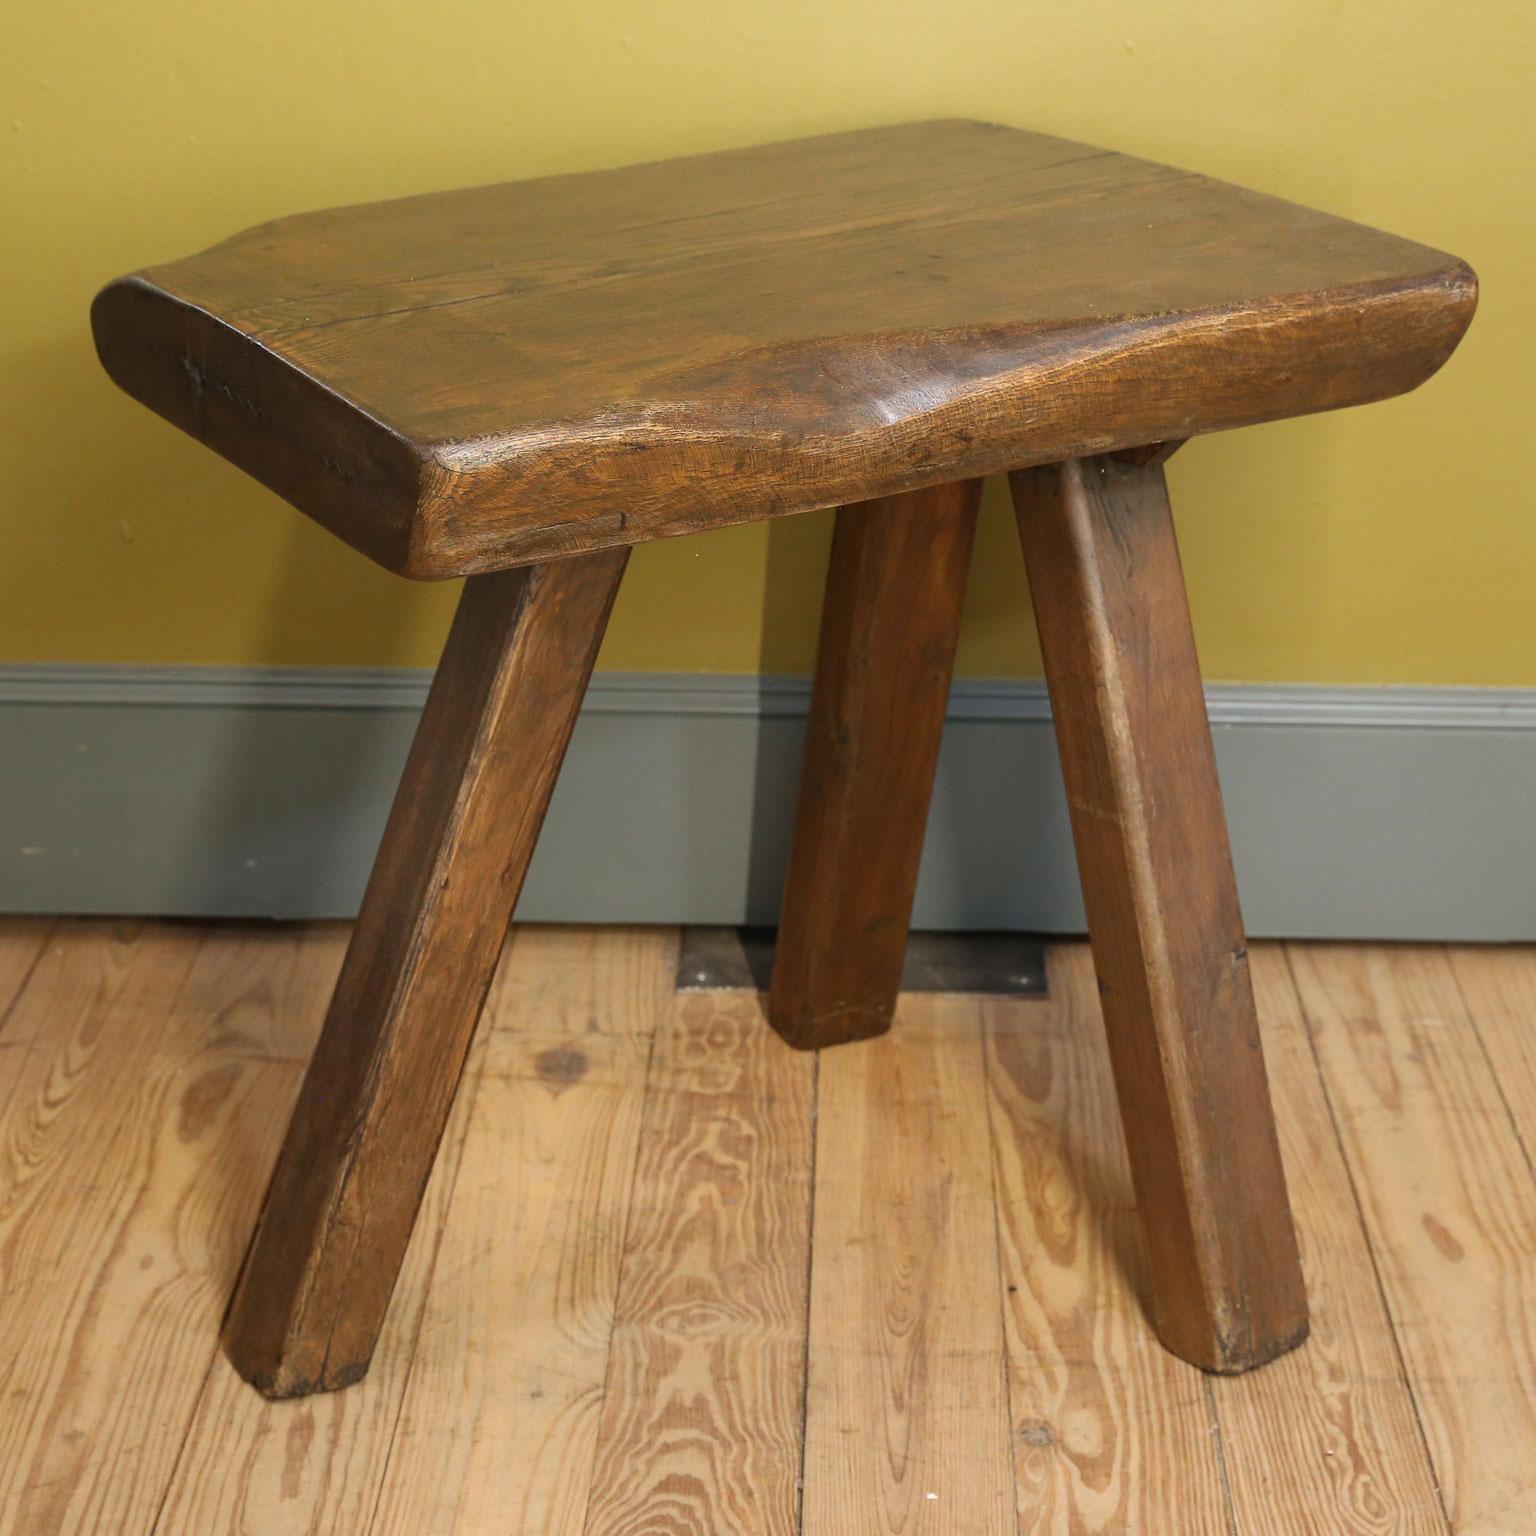 Hand-Carved Chunky Massive Side Table or Stool With a Primitive , Rustic Feel